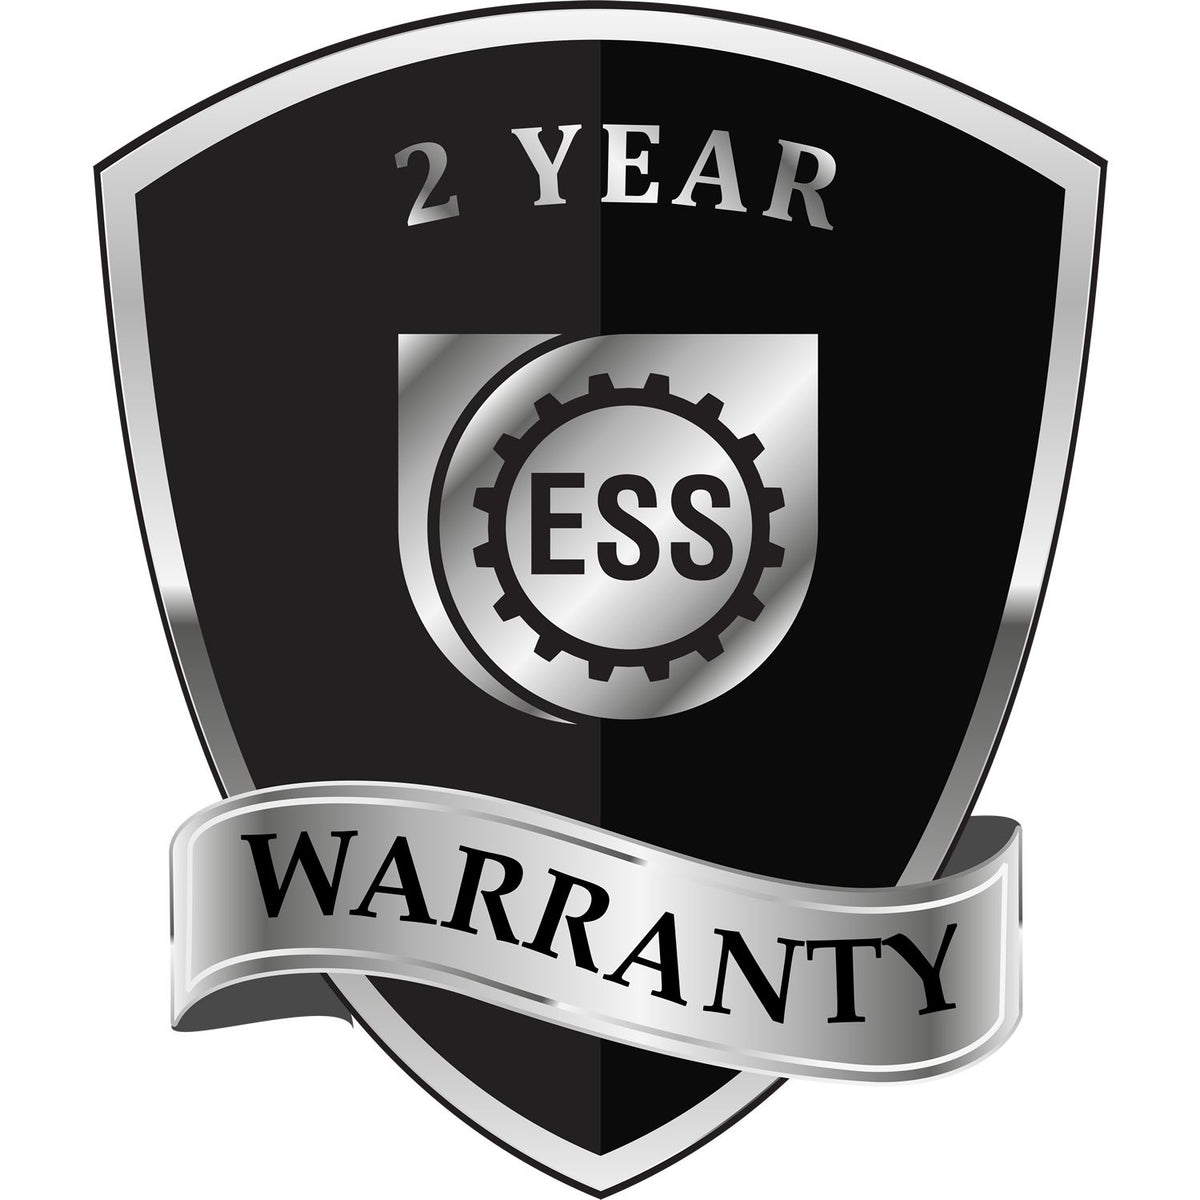 A black and silver badge or emblem showing warranty information for the State of Iowa Extended Long Reach Geologist Seal